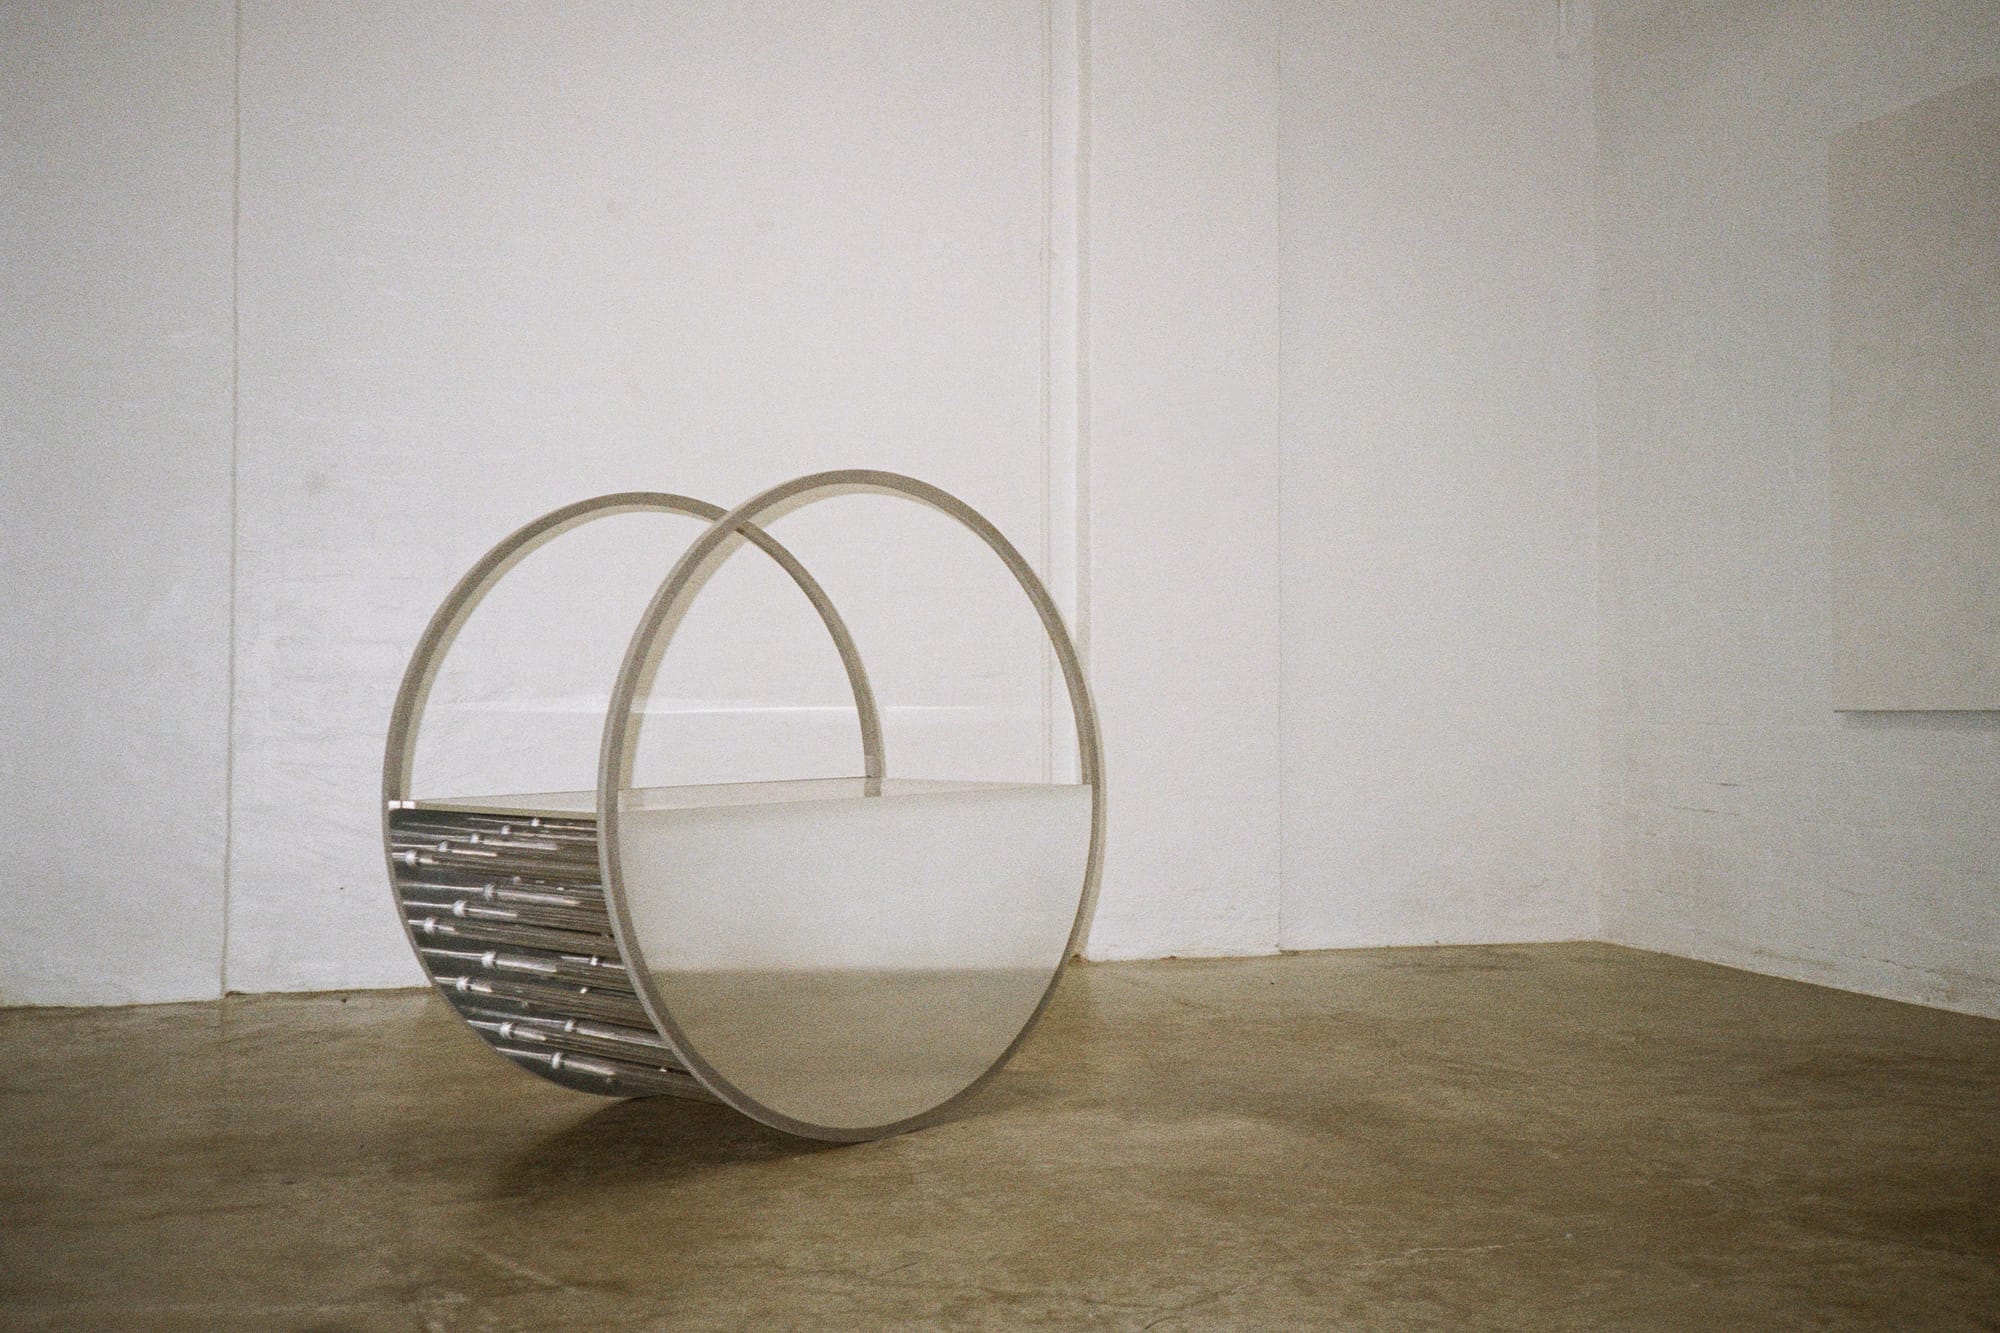 Array 11 by Studio Shand. Photography by Benjamin Jay Shand. Circular sculpture. Barren room with white walls and concrete floor. Curved chrome makes hollow 3D circle sculpture. 